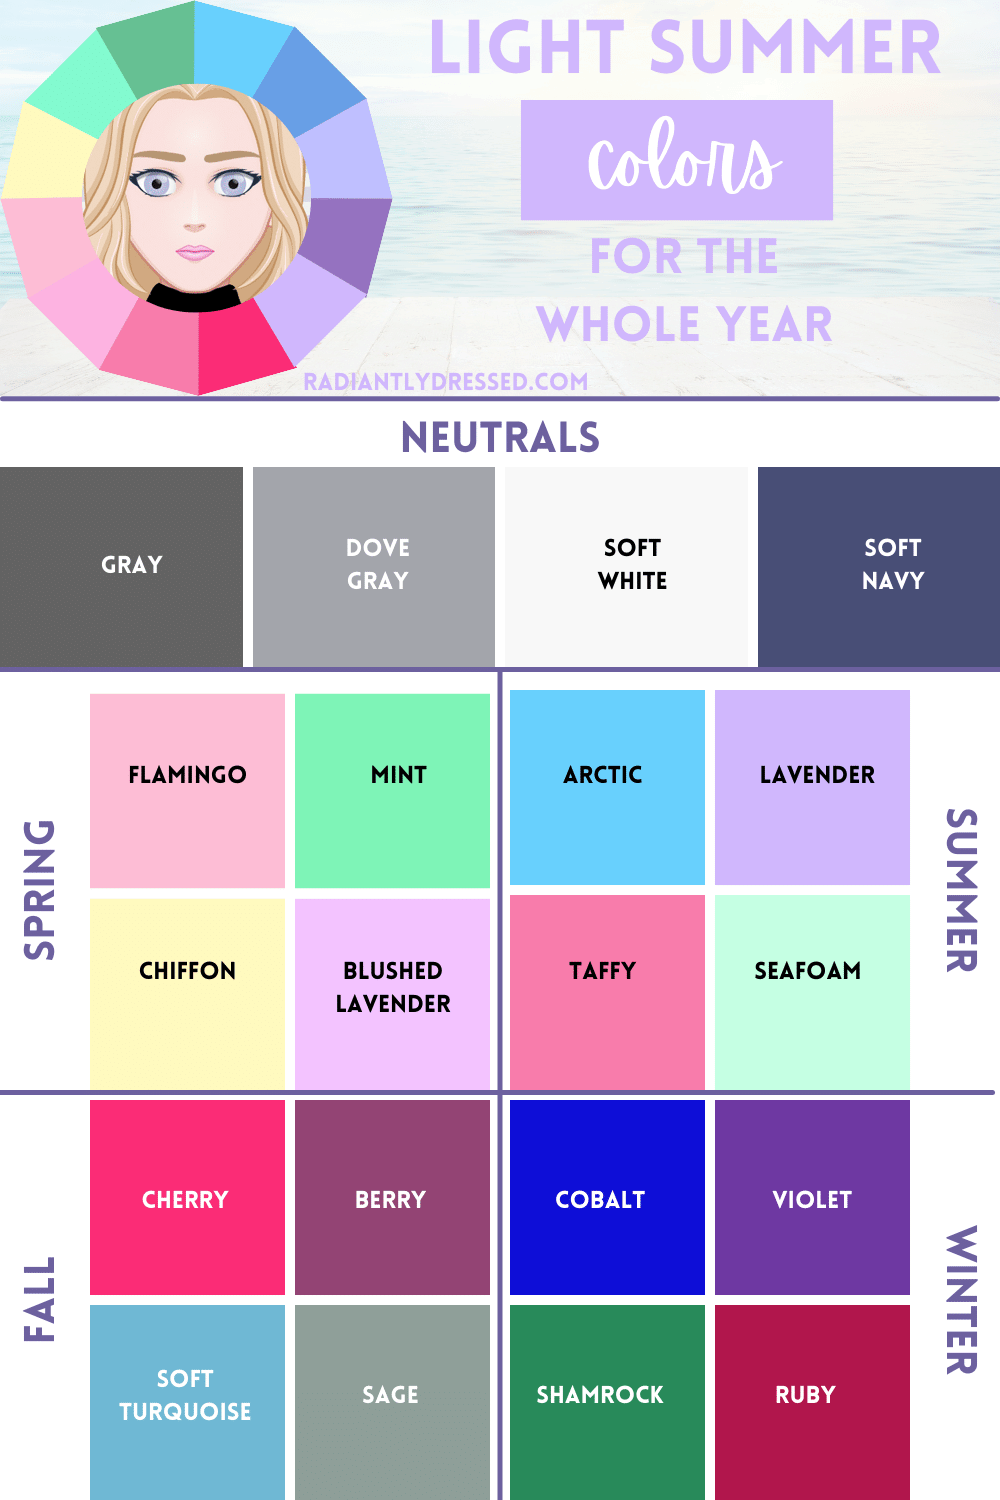 Light summer colors for the whole year